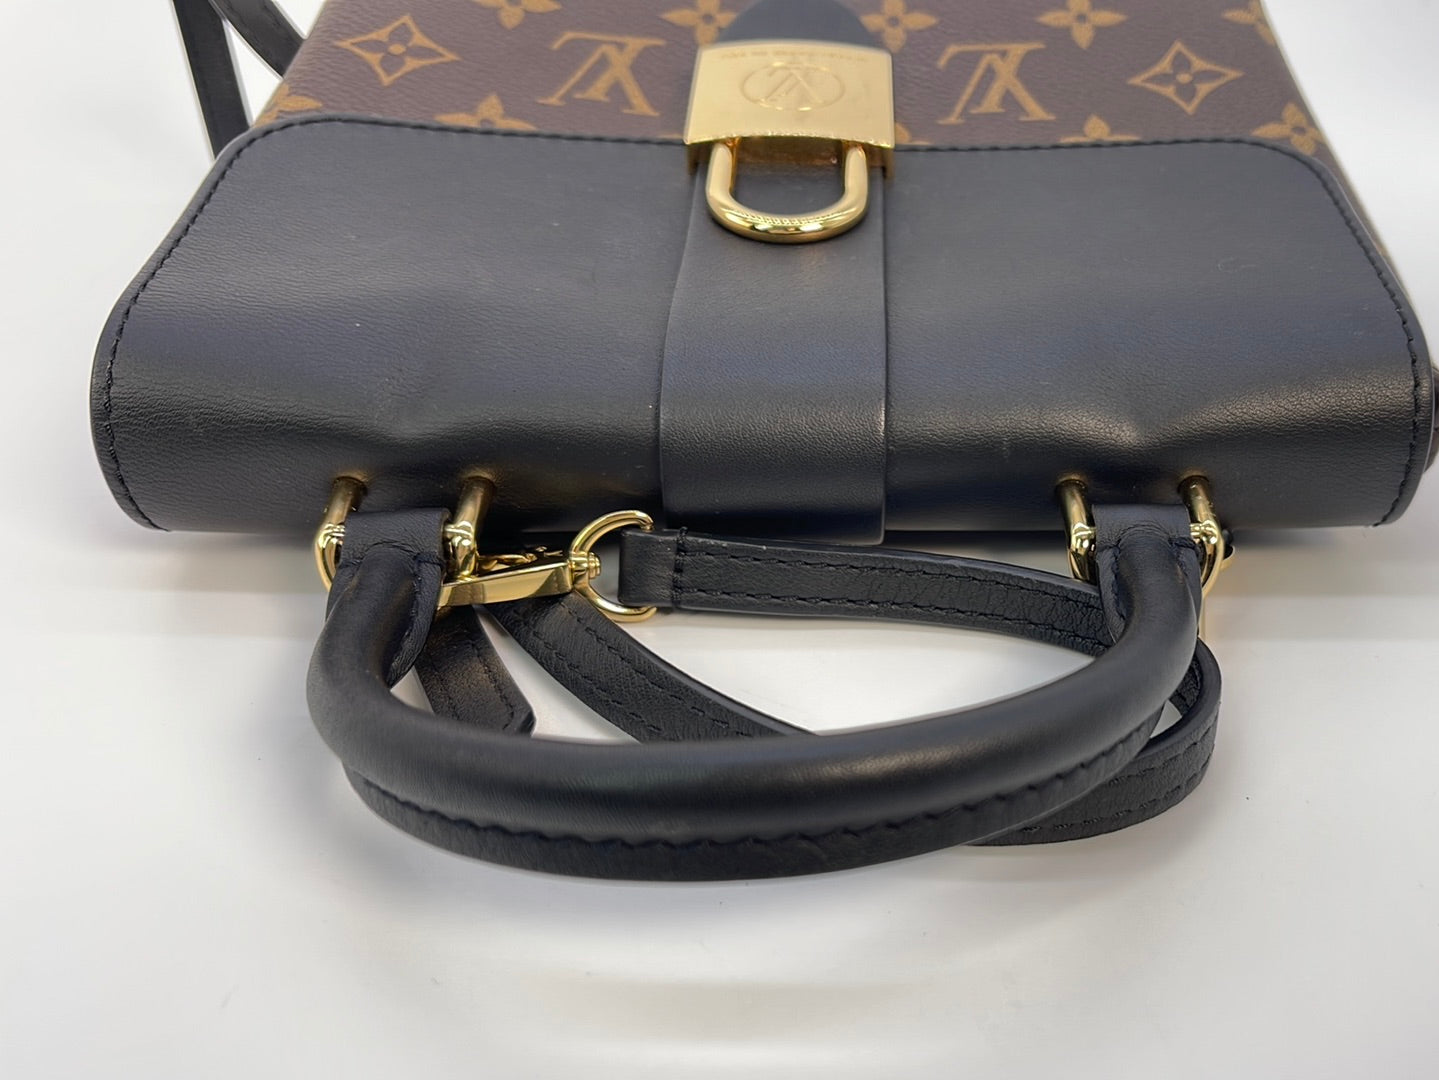 Preloved LOUIS VUITTON Monogram Locky BB Crossbody Bag AA4260 020823 - SOLD AUCTION for $1500